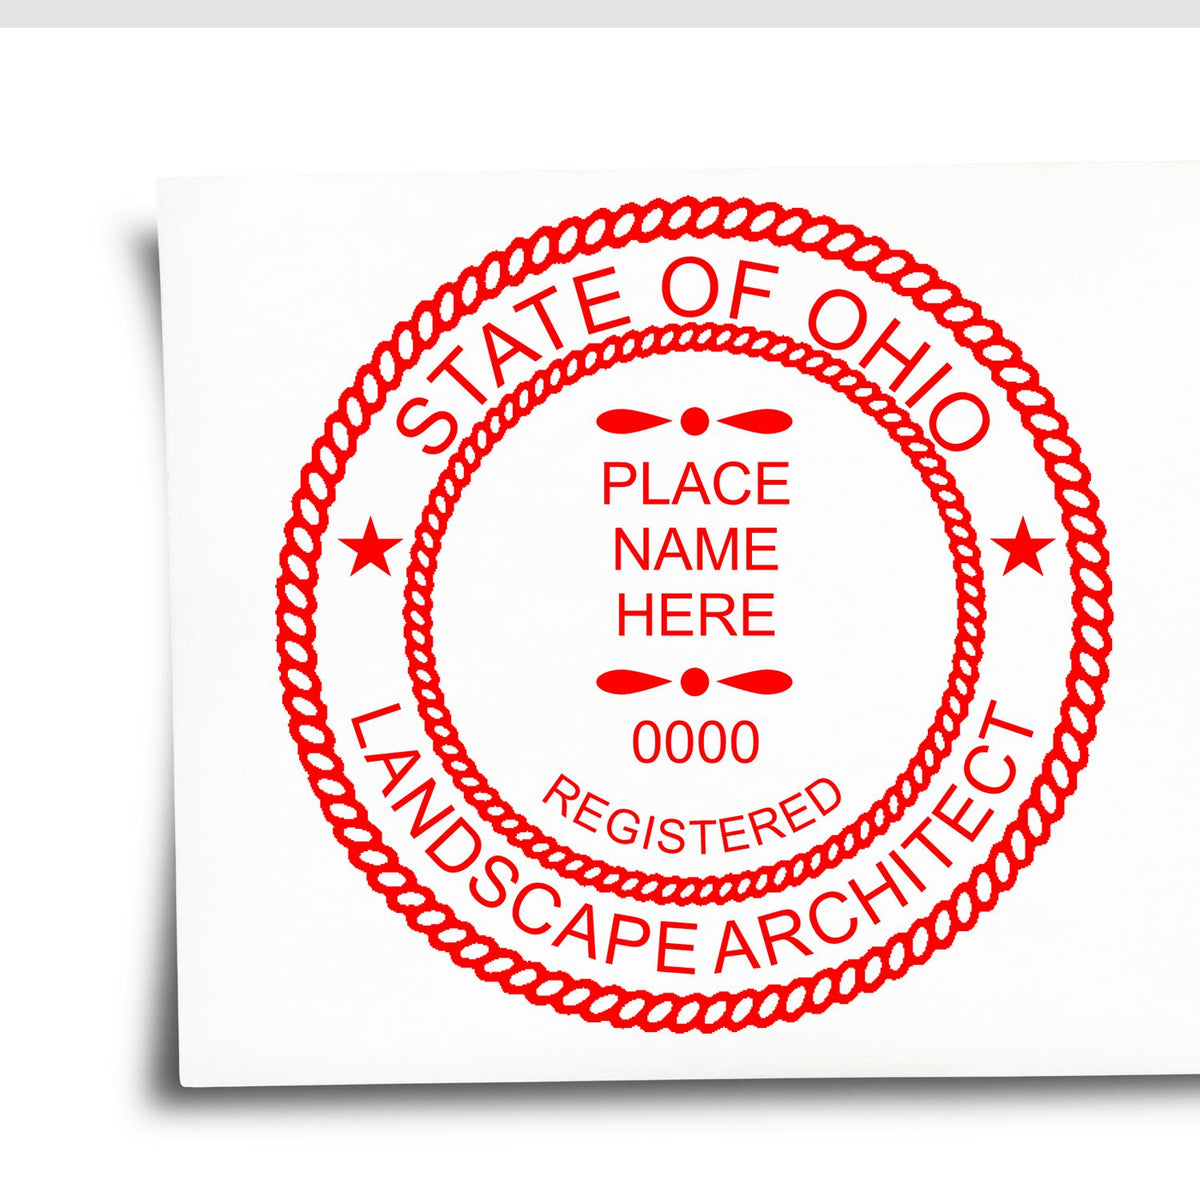 The Ohio Landscape Architectural Seal Stamp stamp impression comes to life with a crisp, detailed photo on paper - showcasing true professional quality.